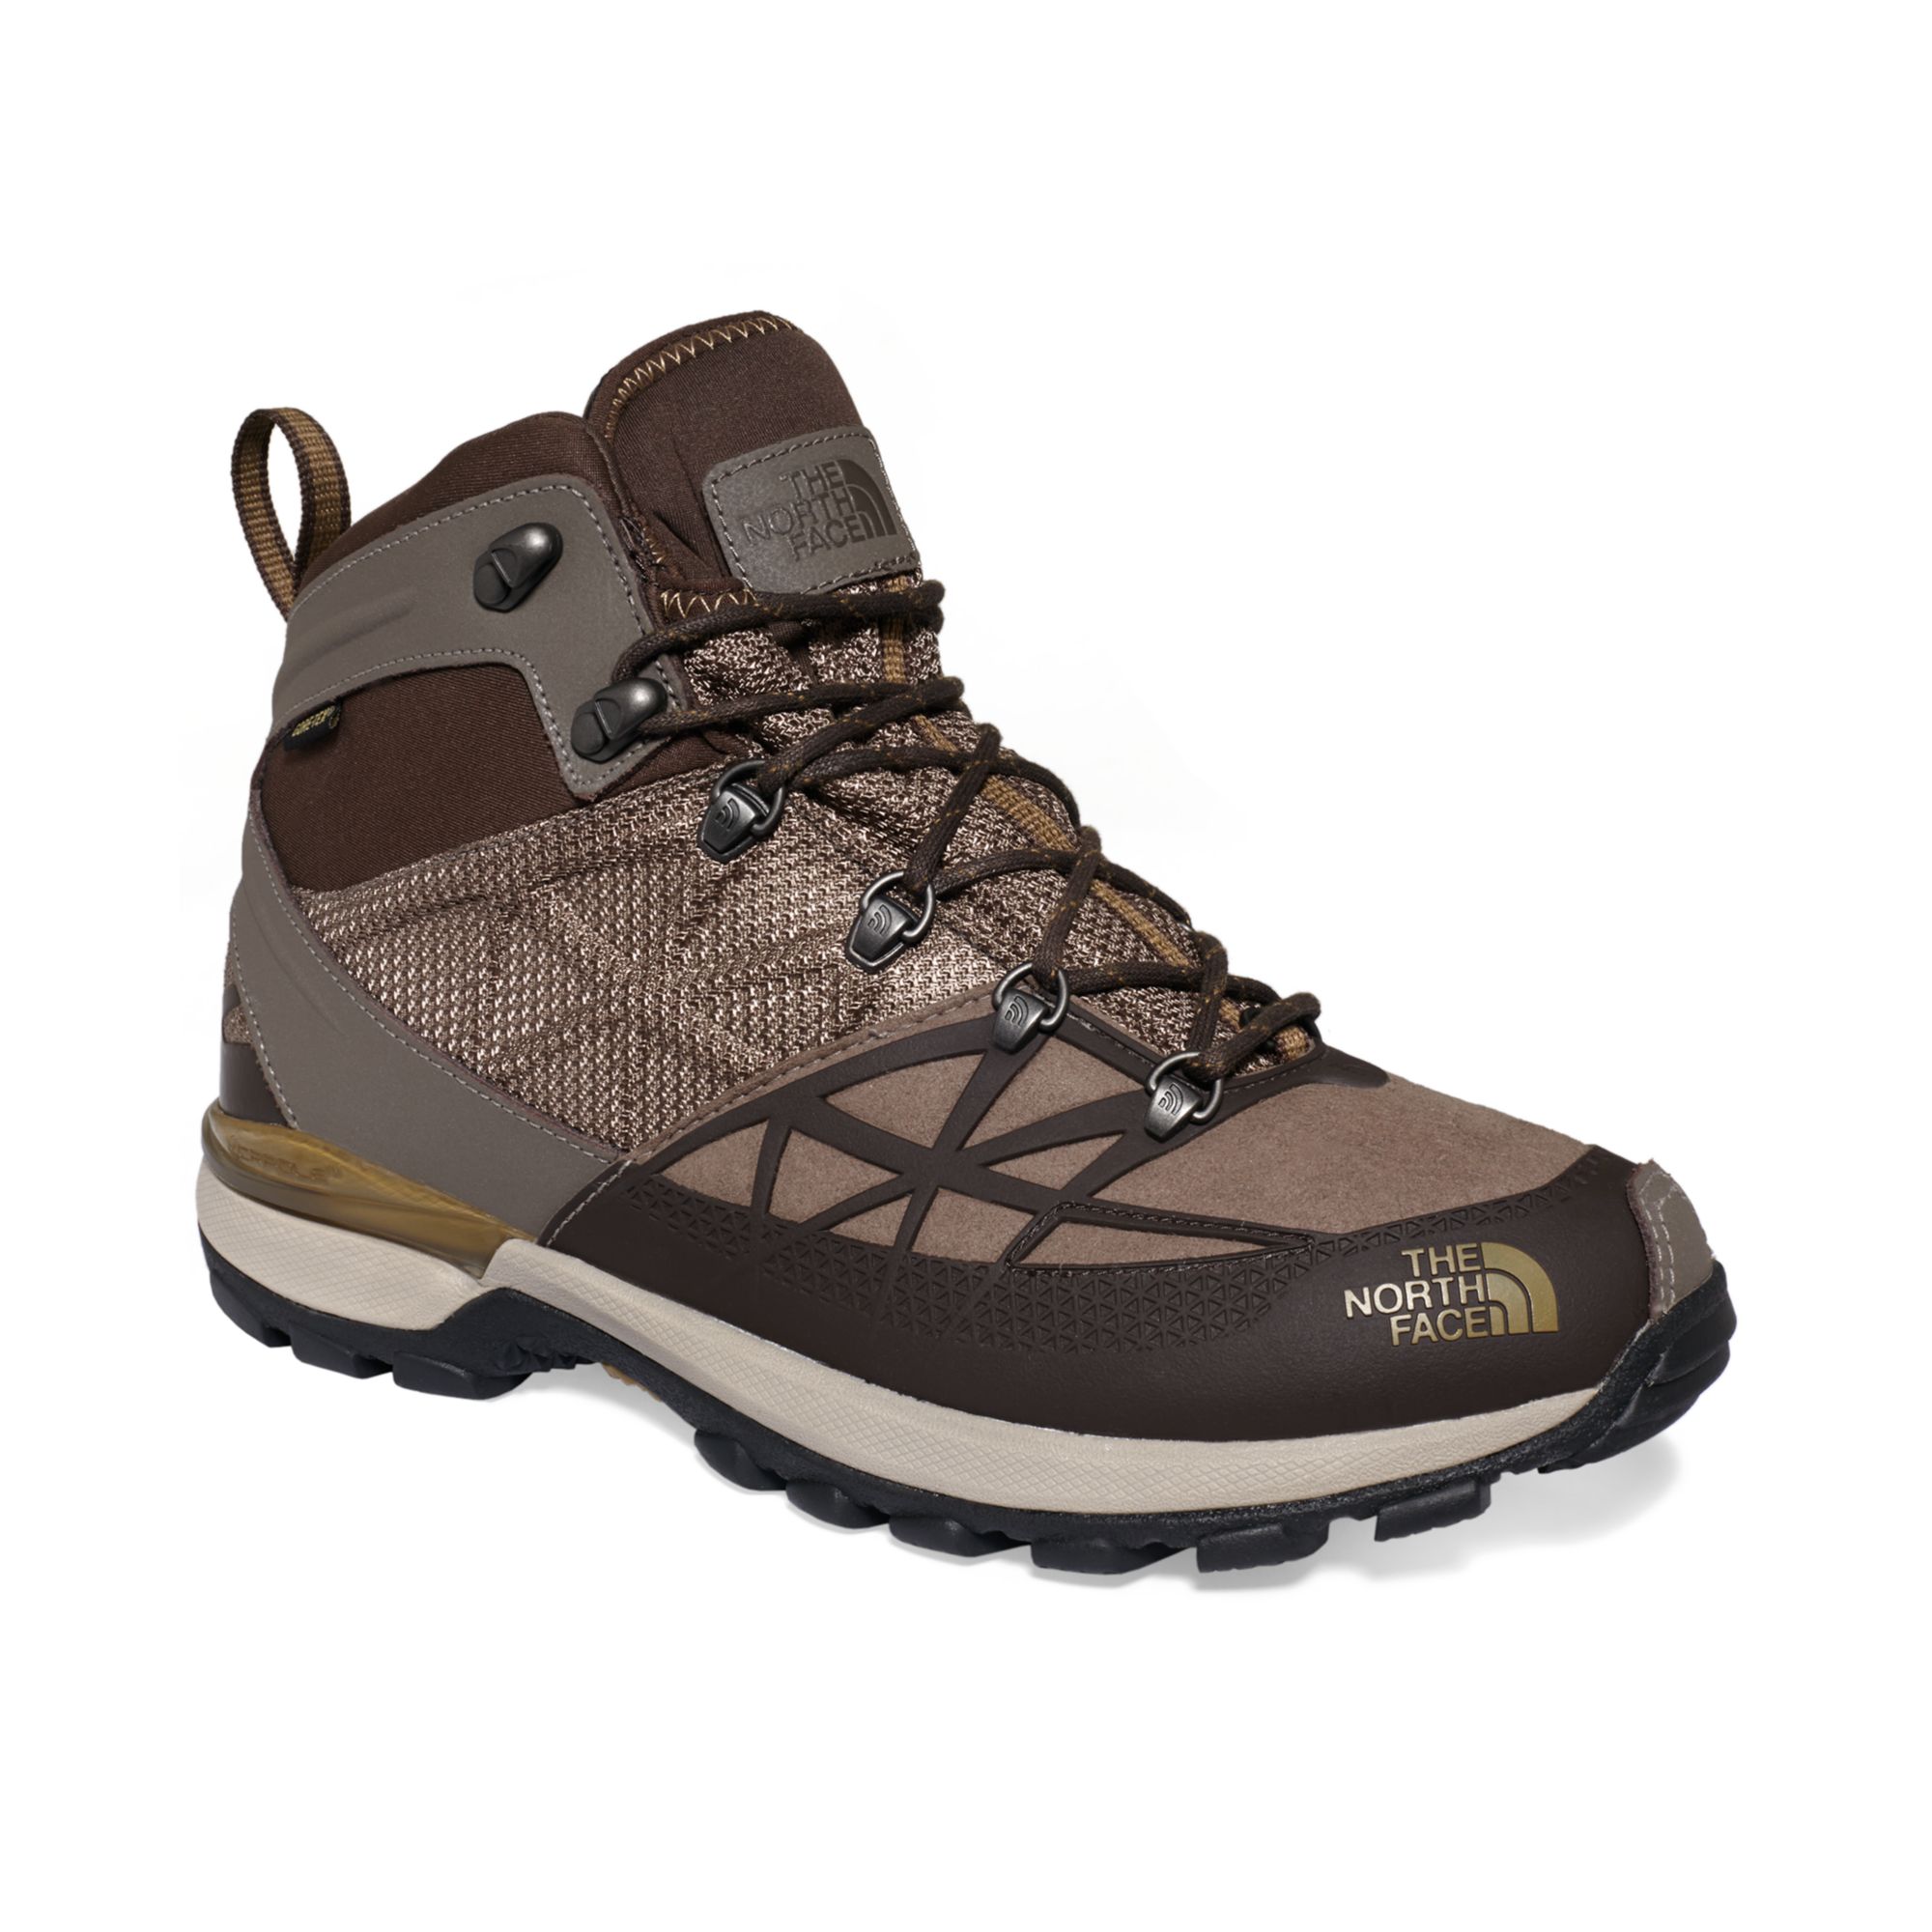 The North Face Iceflare Mid Gtx Goretex Waterproof Boots in Brown for ...